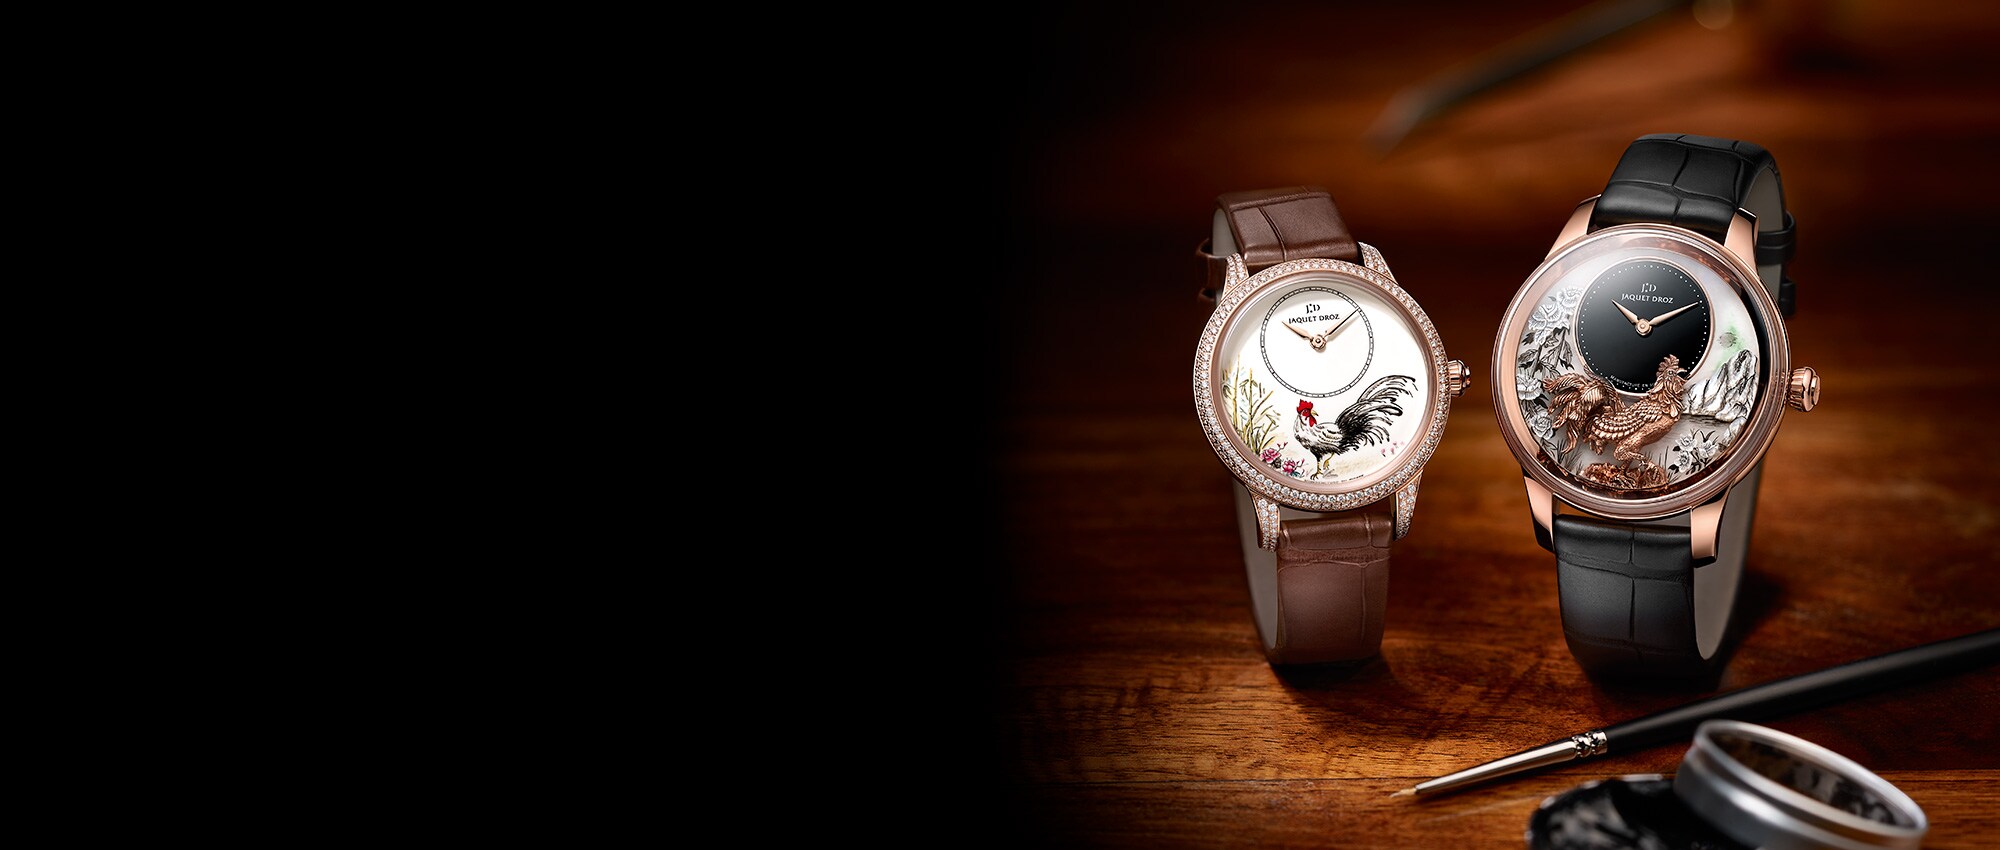 JAQUET DROZ CELEBRATES THE CHINESE NEW YEAR WITH A TRIBUTE TO THE FIRE ROOSTER